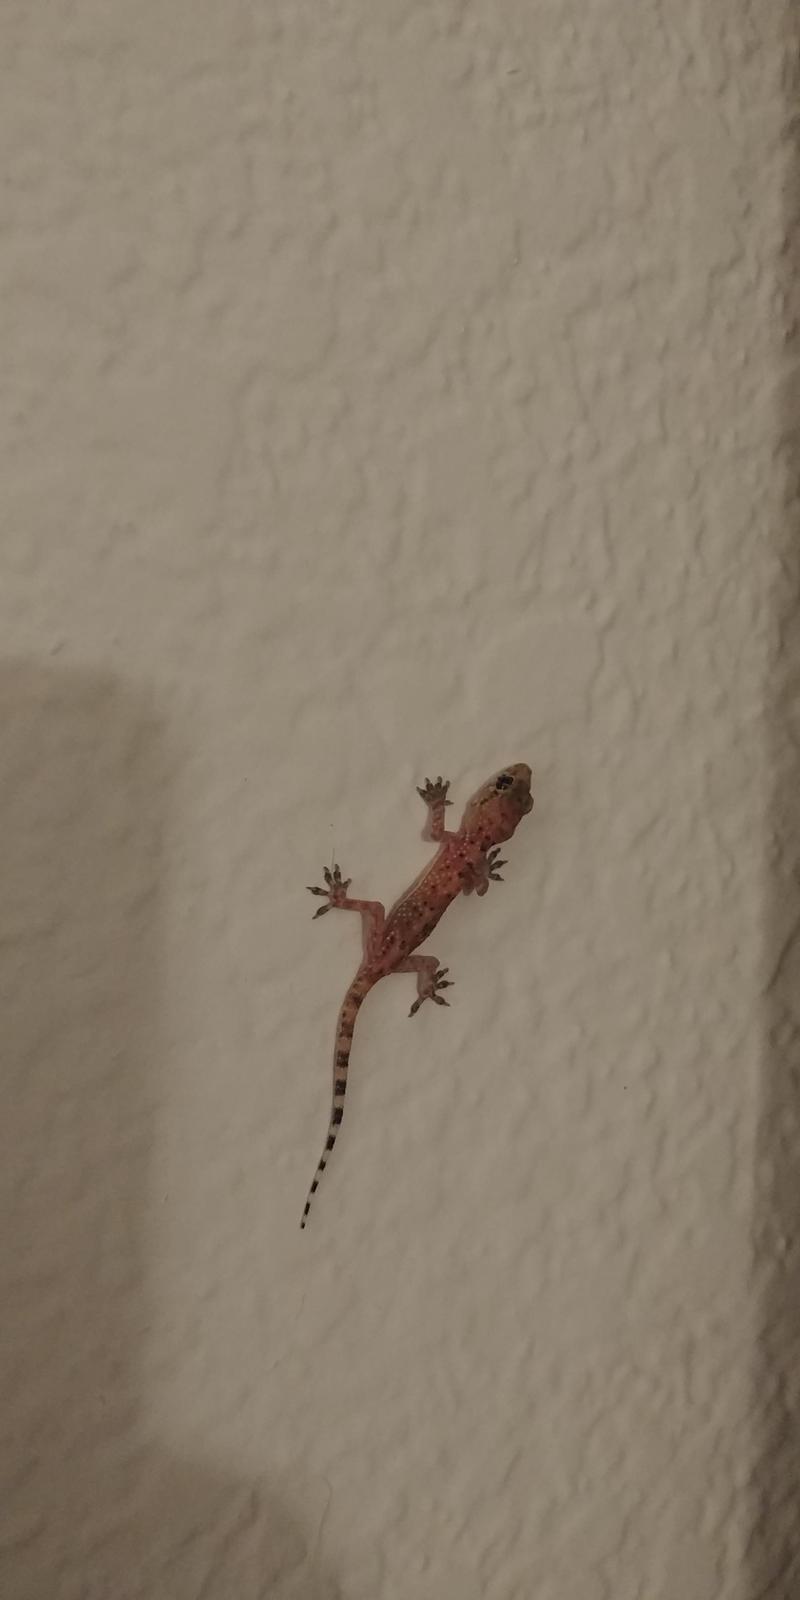 Mediterranean House Gecko Photo by Peter Bergeson